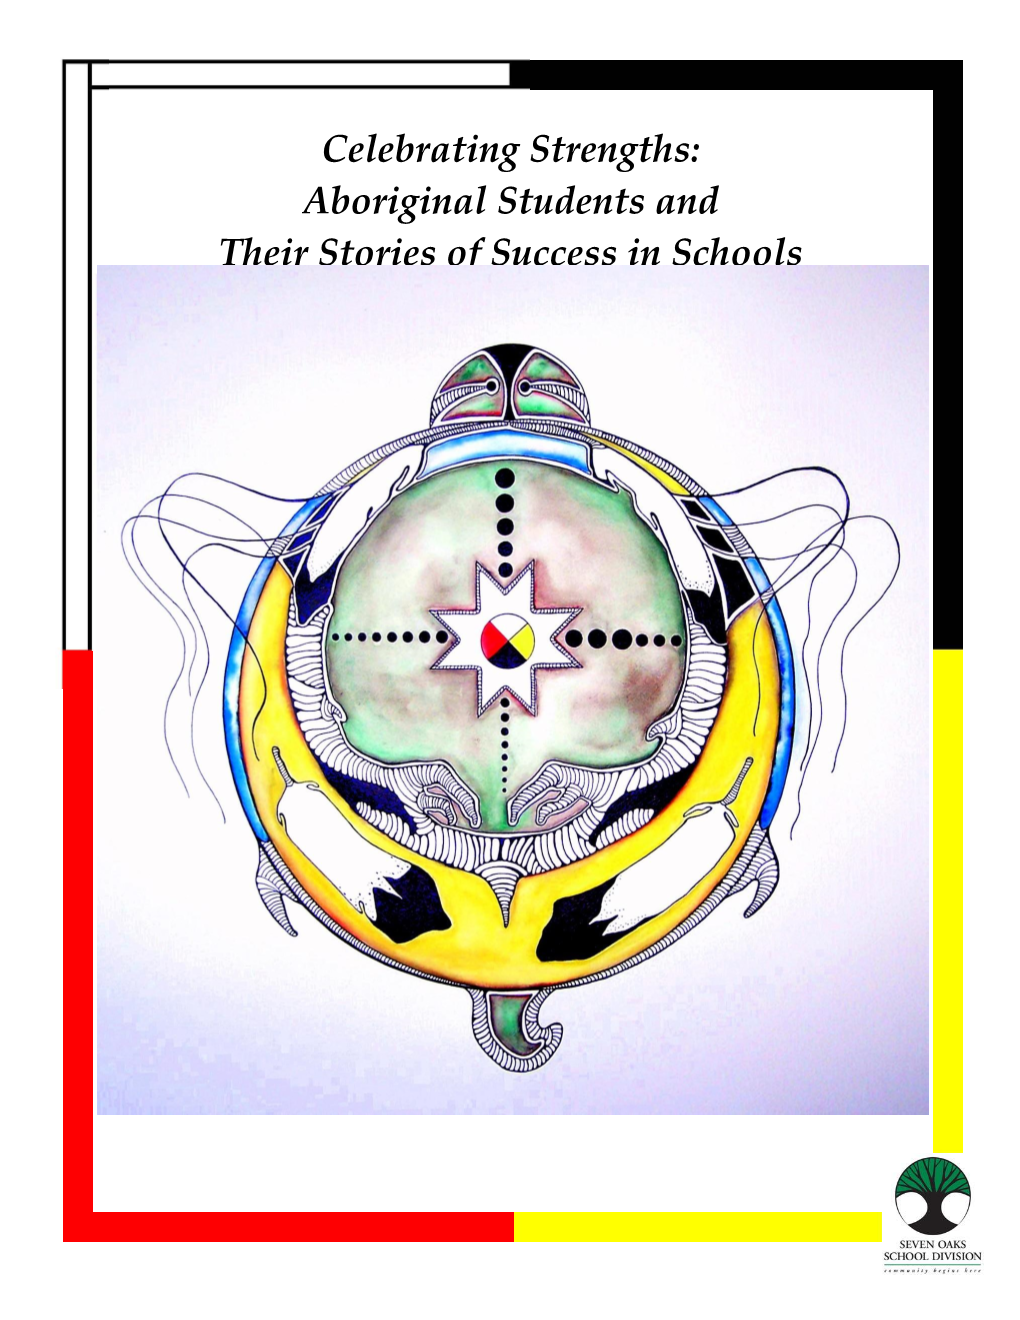 Celebrating Strengths: Aboriginal Students and Their Stories of Success in Schools